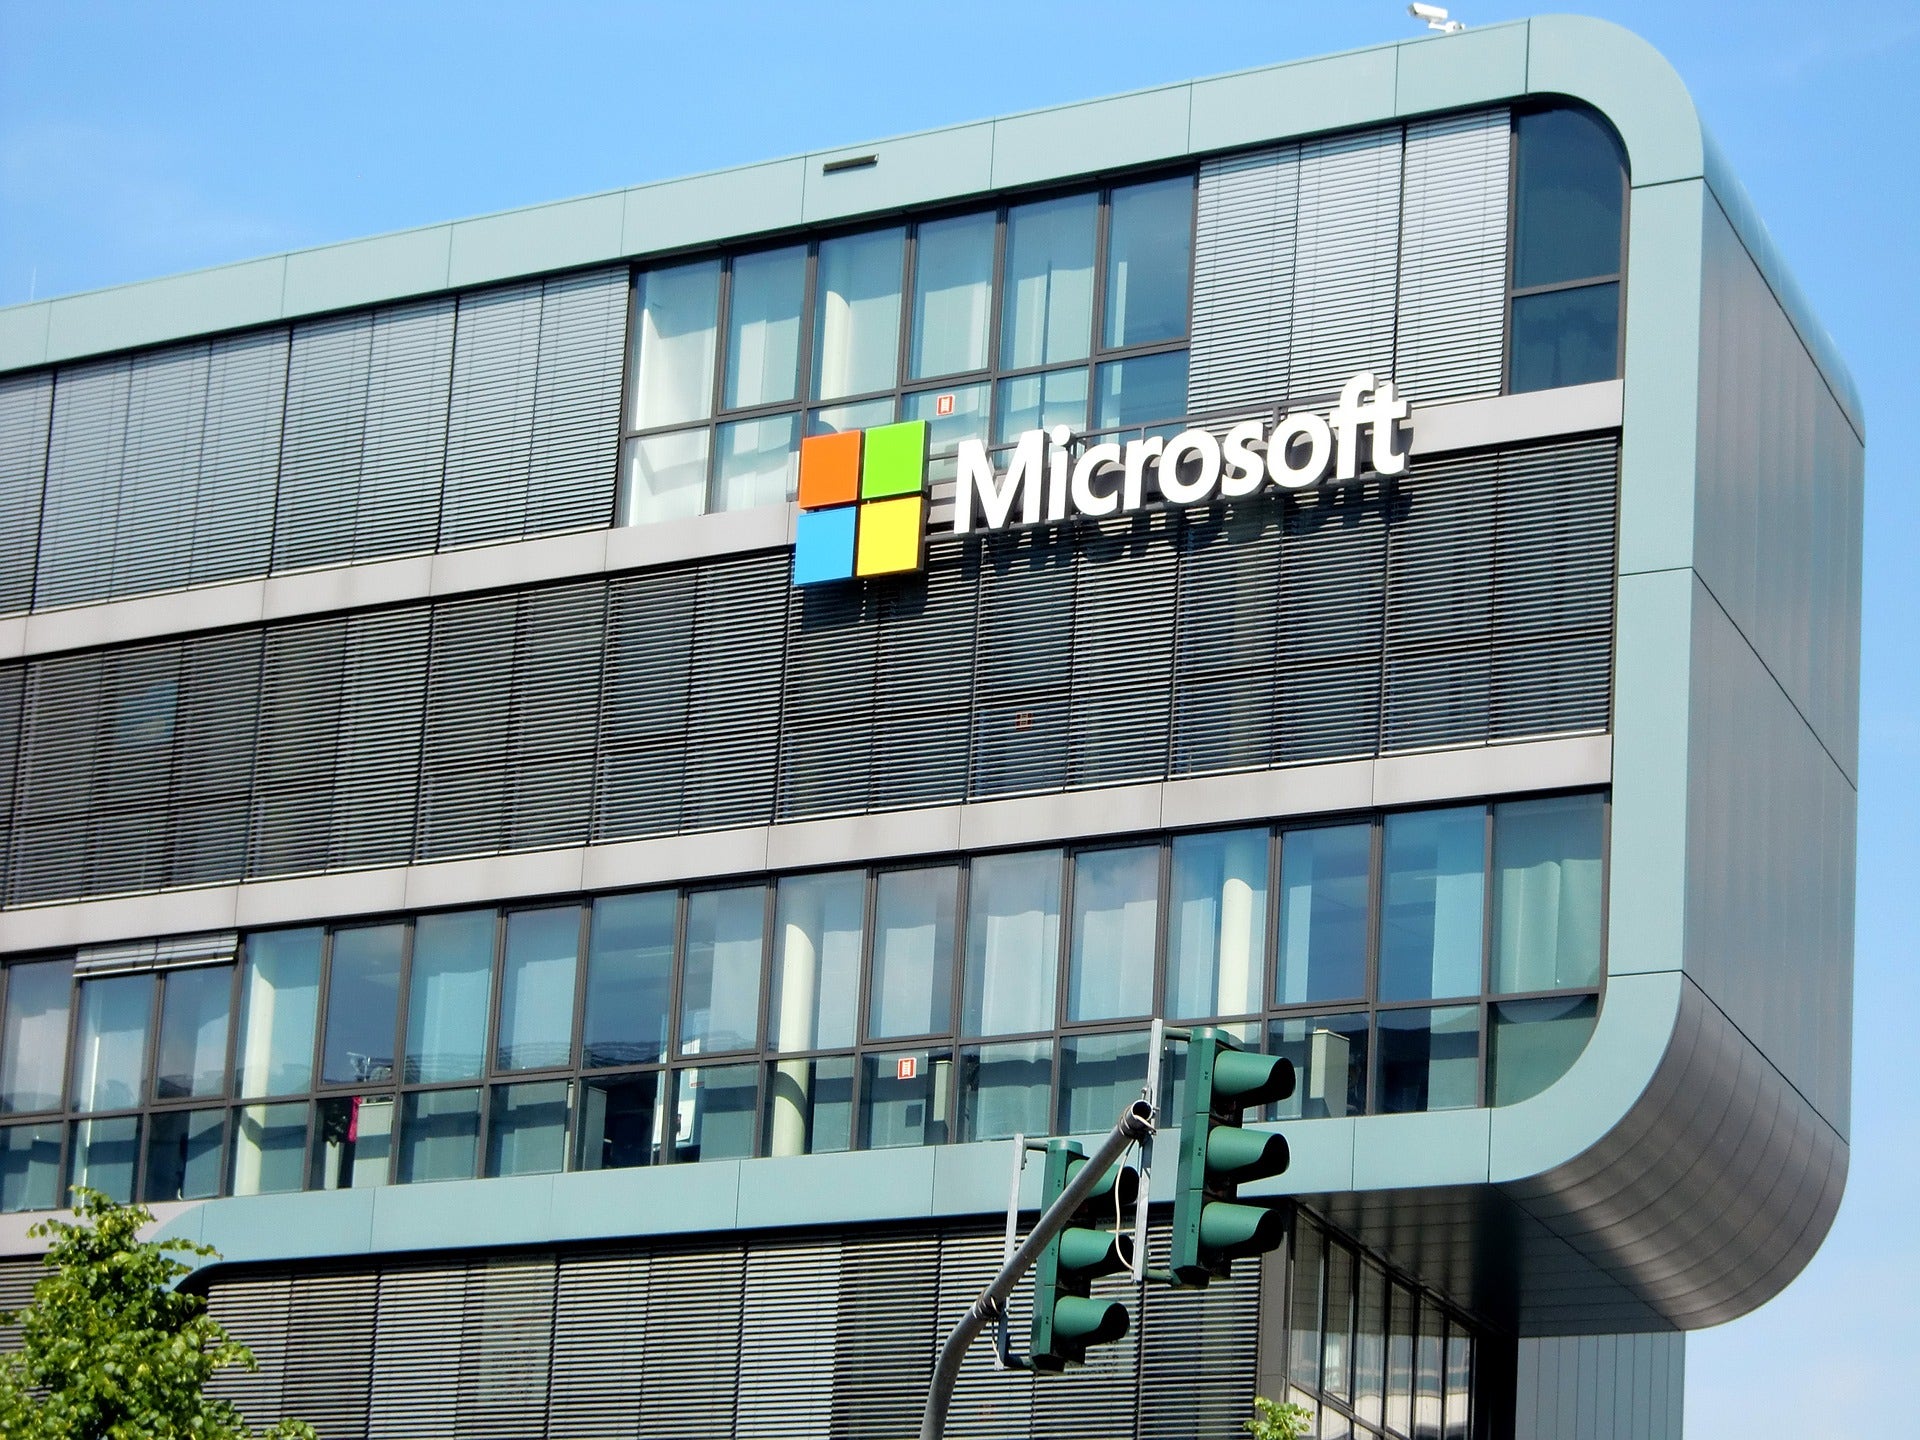 You Ask, We Analyze: Why Microsoft Needs A Quick Rest Before Another Run Higher